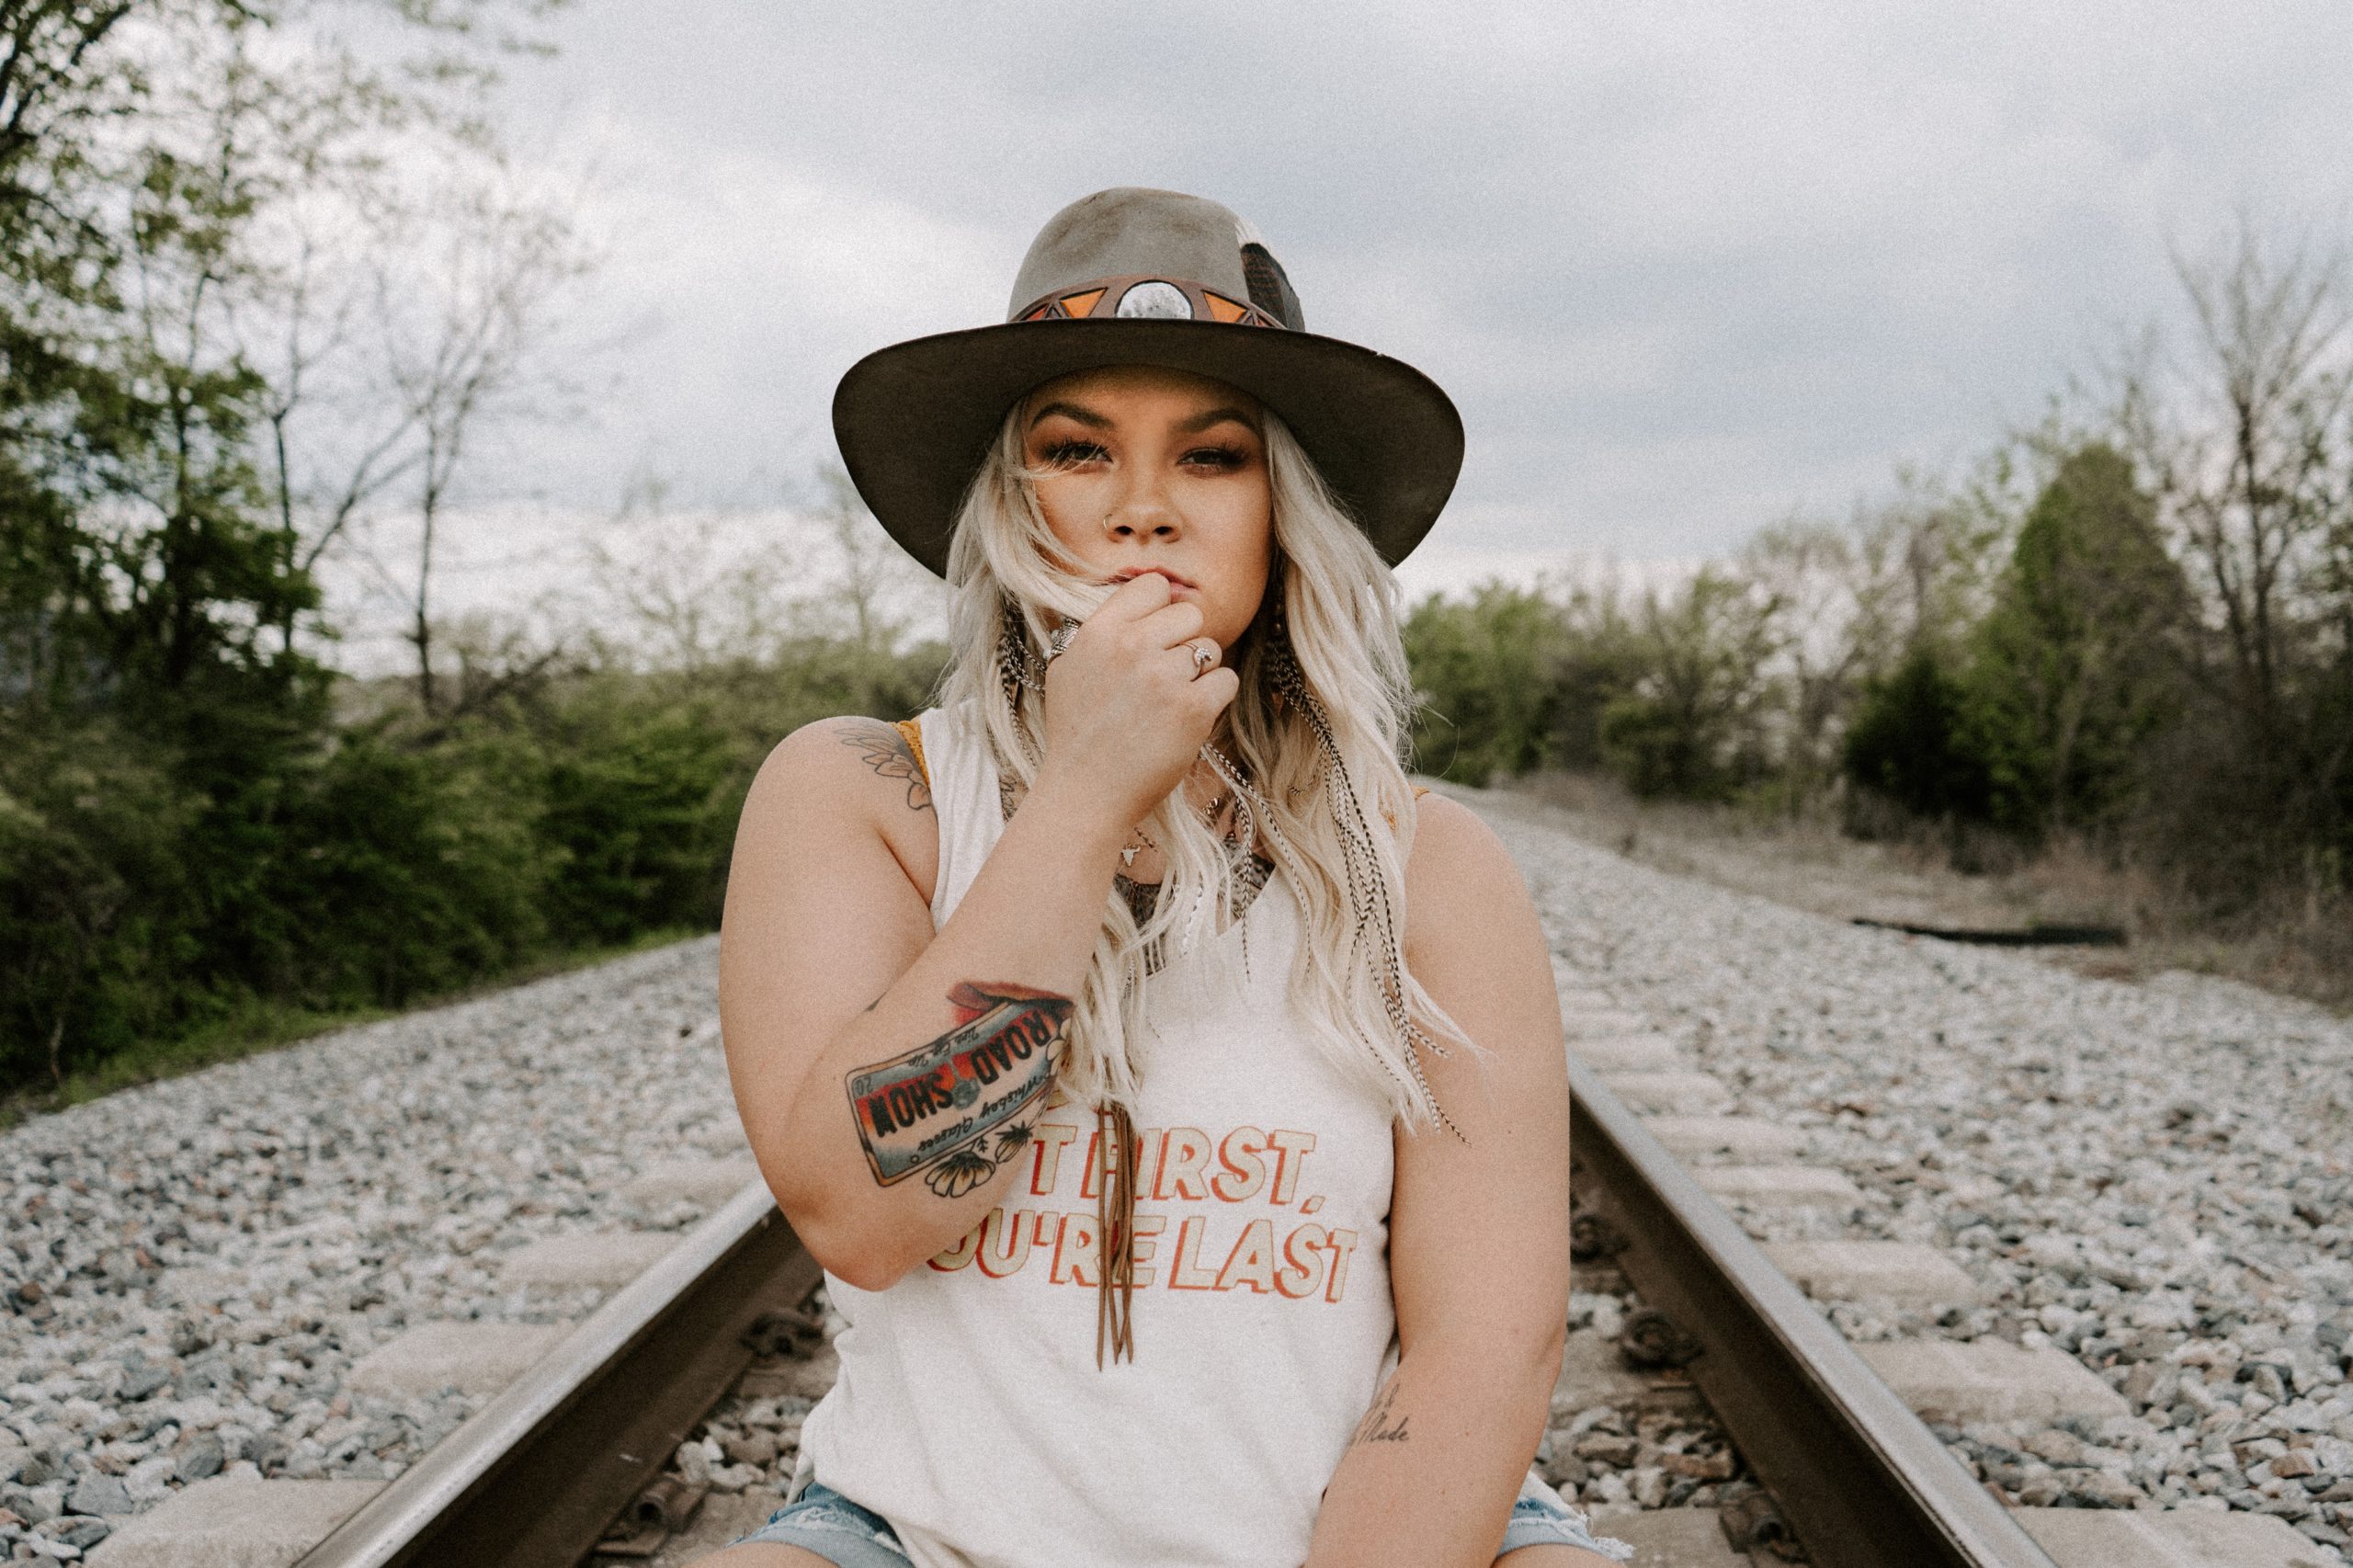 Get To Know Ashland Craft: The South Carolina Native Who Is Country Music's Next Badass – Celeb Secrets Country